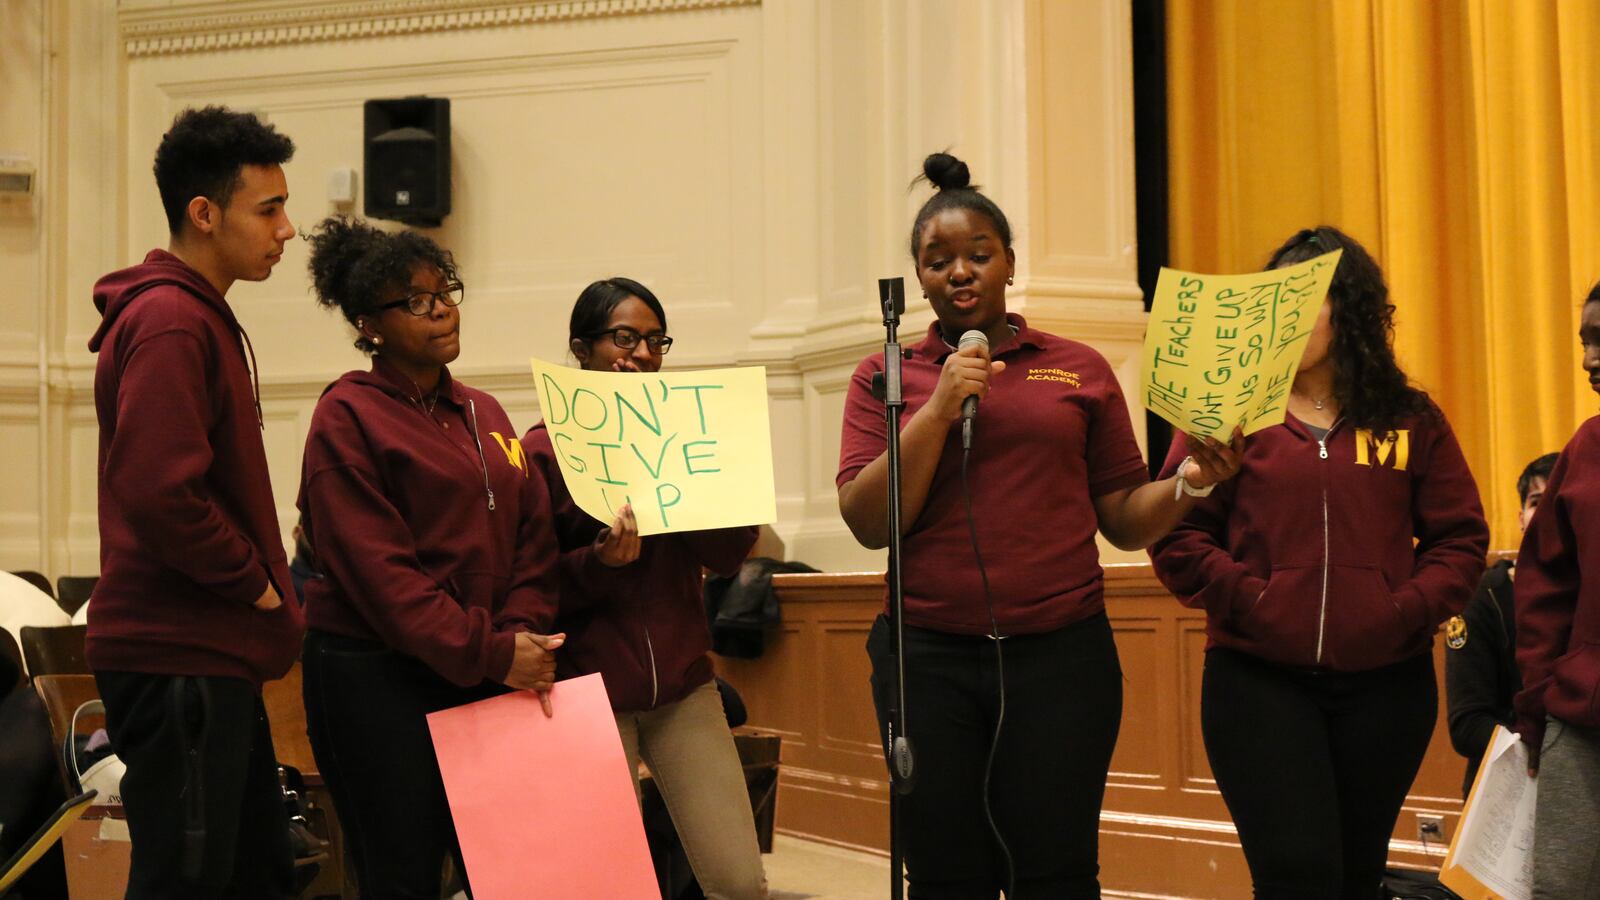 Students from Monroe Academy for Visual Arts and Design protest the planned closure of their school at a recent public hearing.